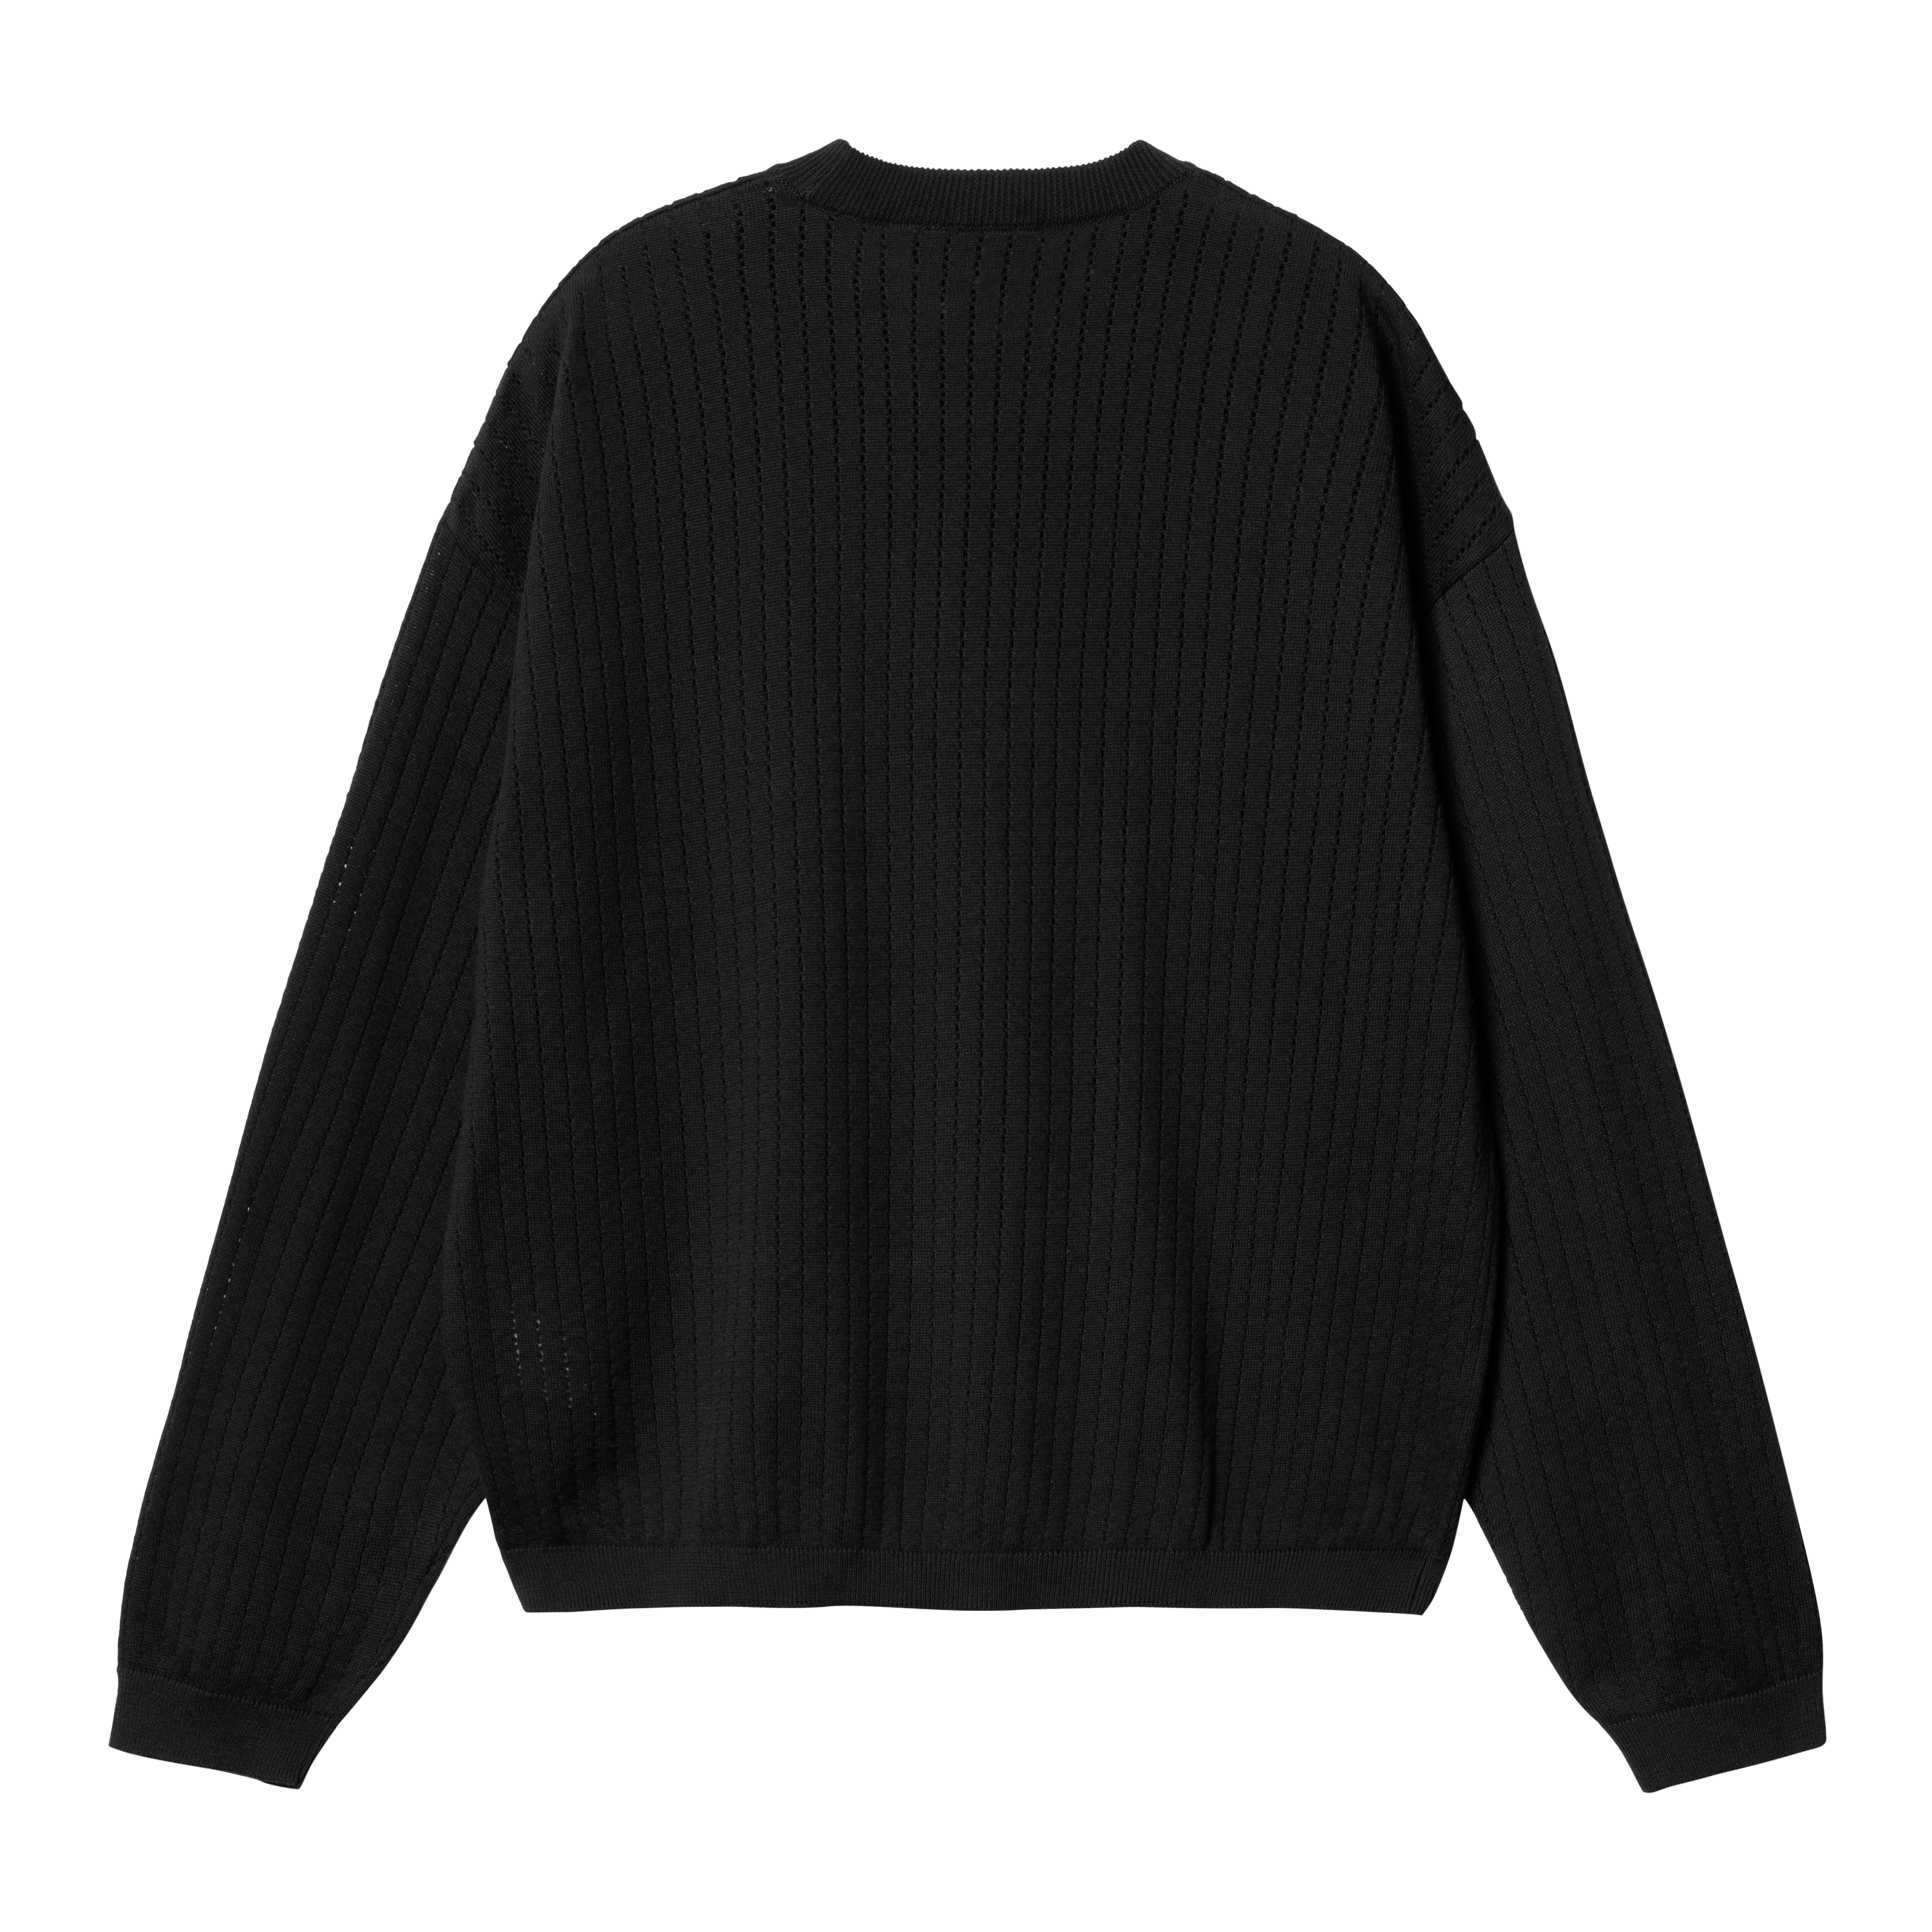 Carhartt WIP W' Norlina Sweater, Black | Official Online Store